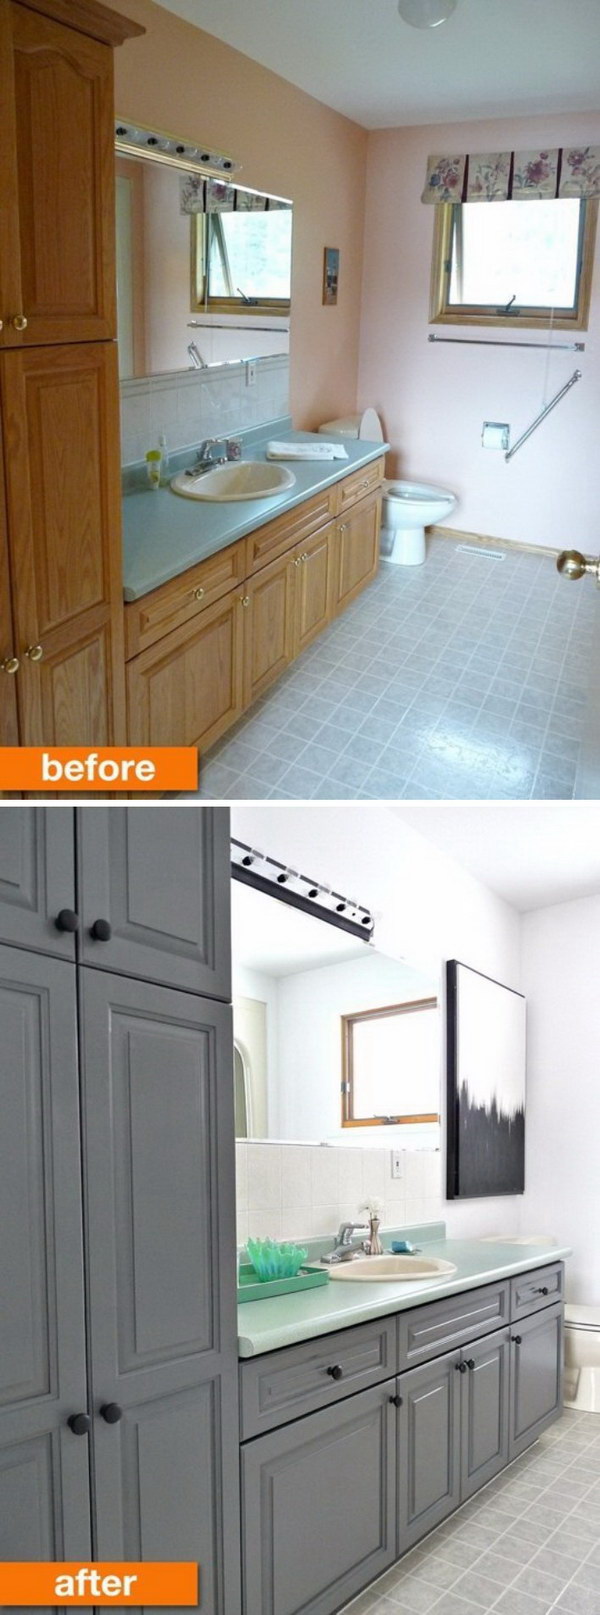 Before and After Makeovers 20 Most Beautiful Bathroom  